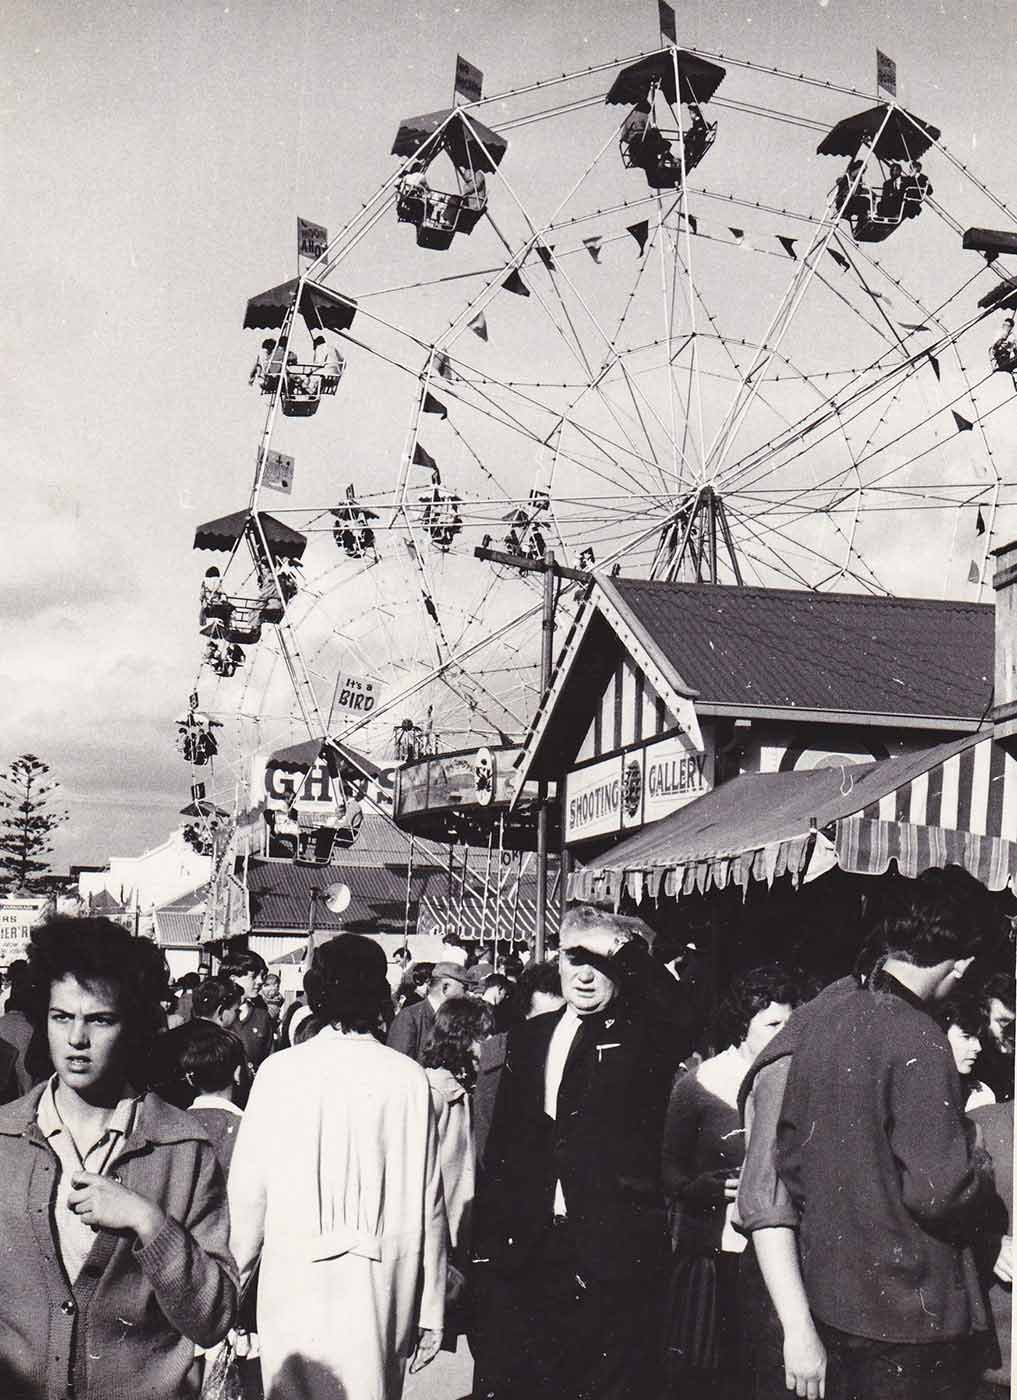 Black and white photo showing a ferris wheel in the distance and a group of people walking down sideshow alley in the foreground. - click to view larger image